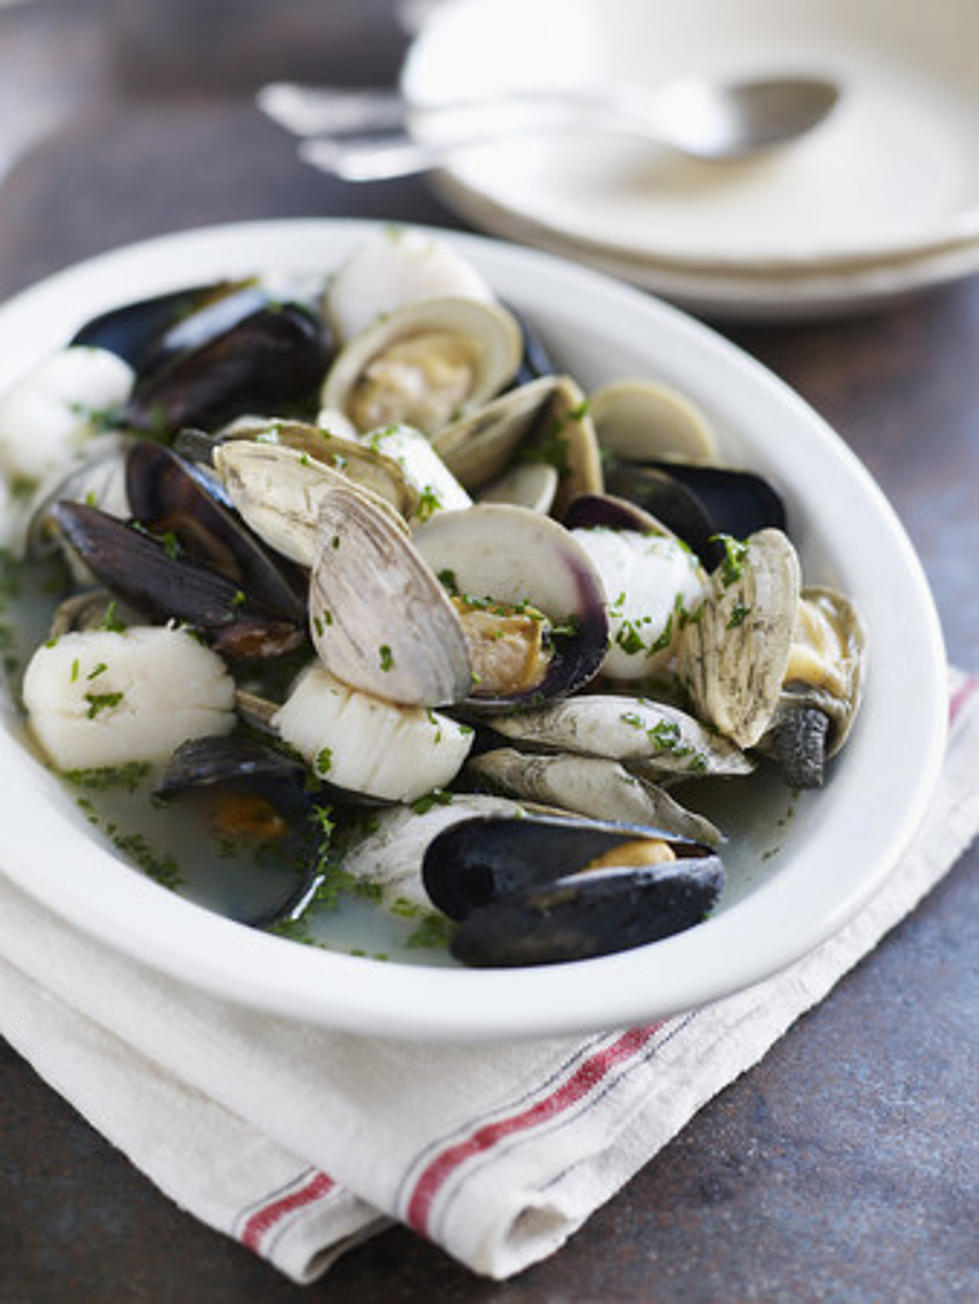 Love Clams, Get Your Seafood On at this Annual NJ Event